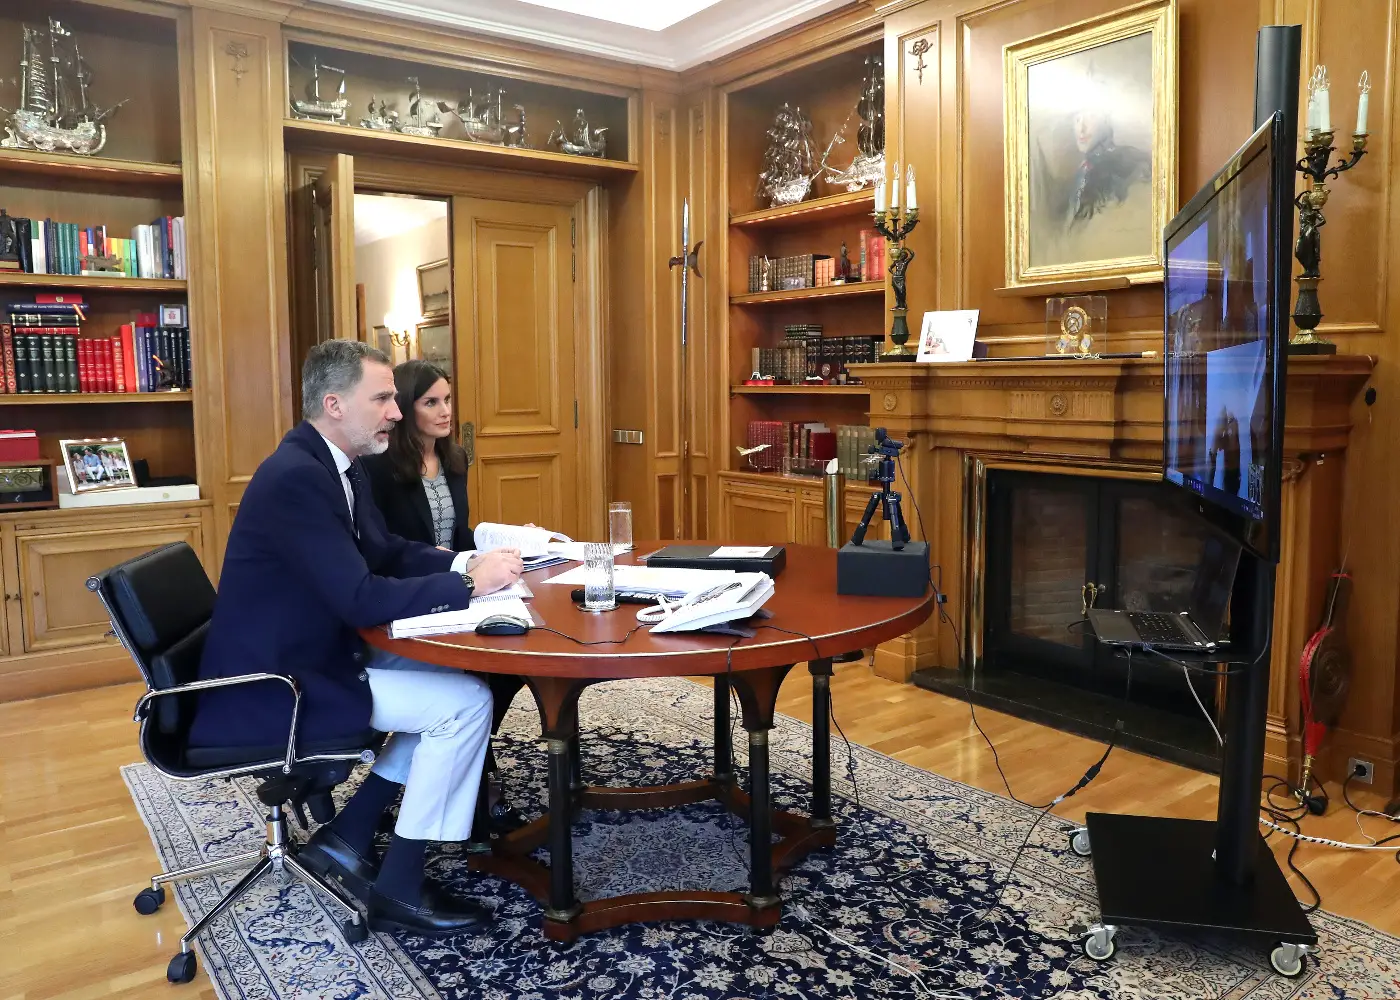 Queen and King Felipe held a videoconference with representatives of the State Digitization and Artificial Intelligence